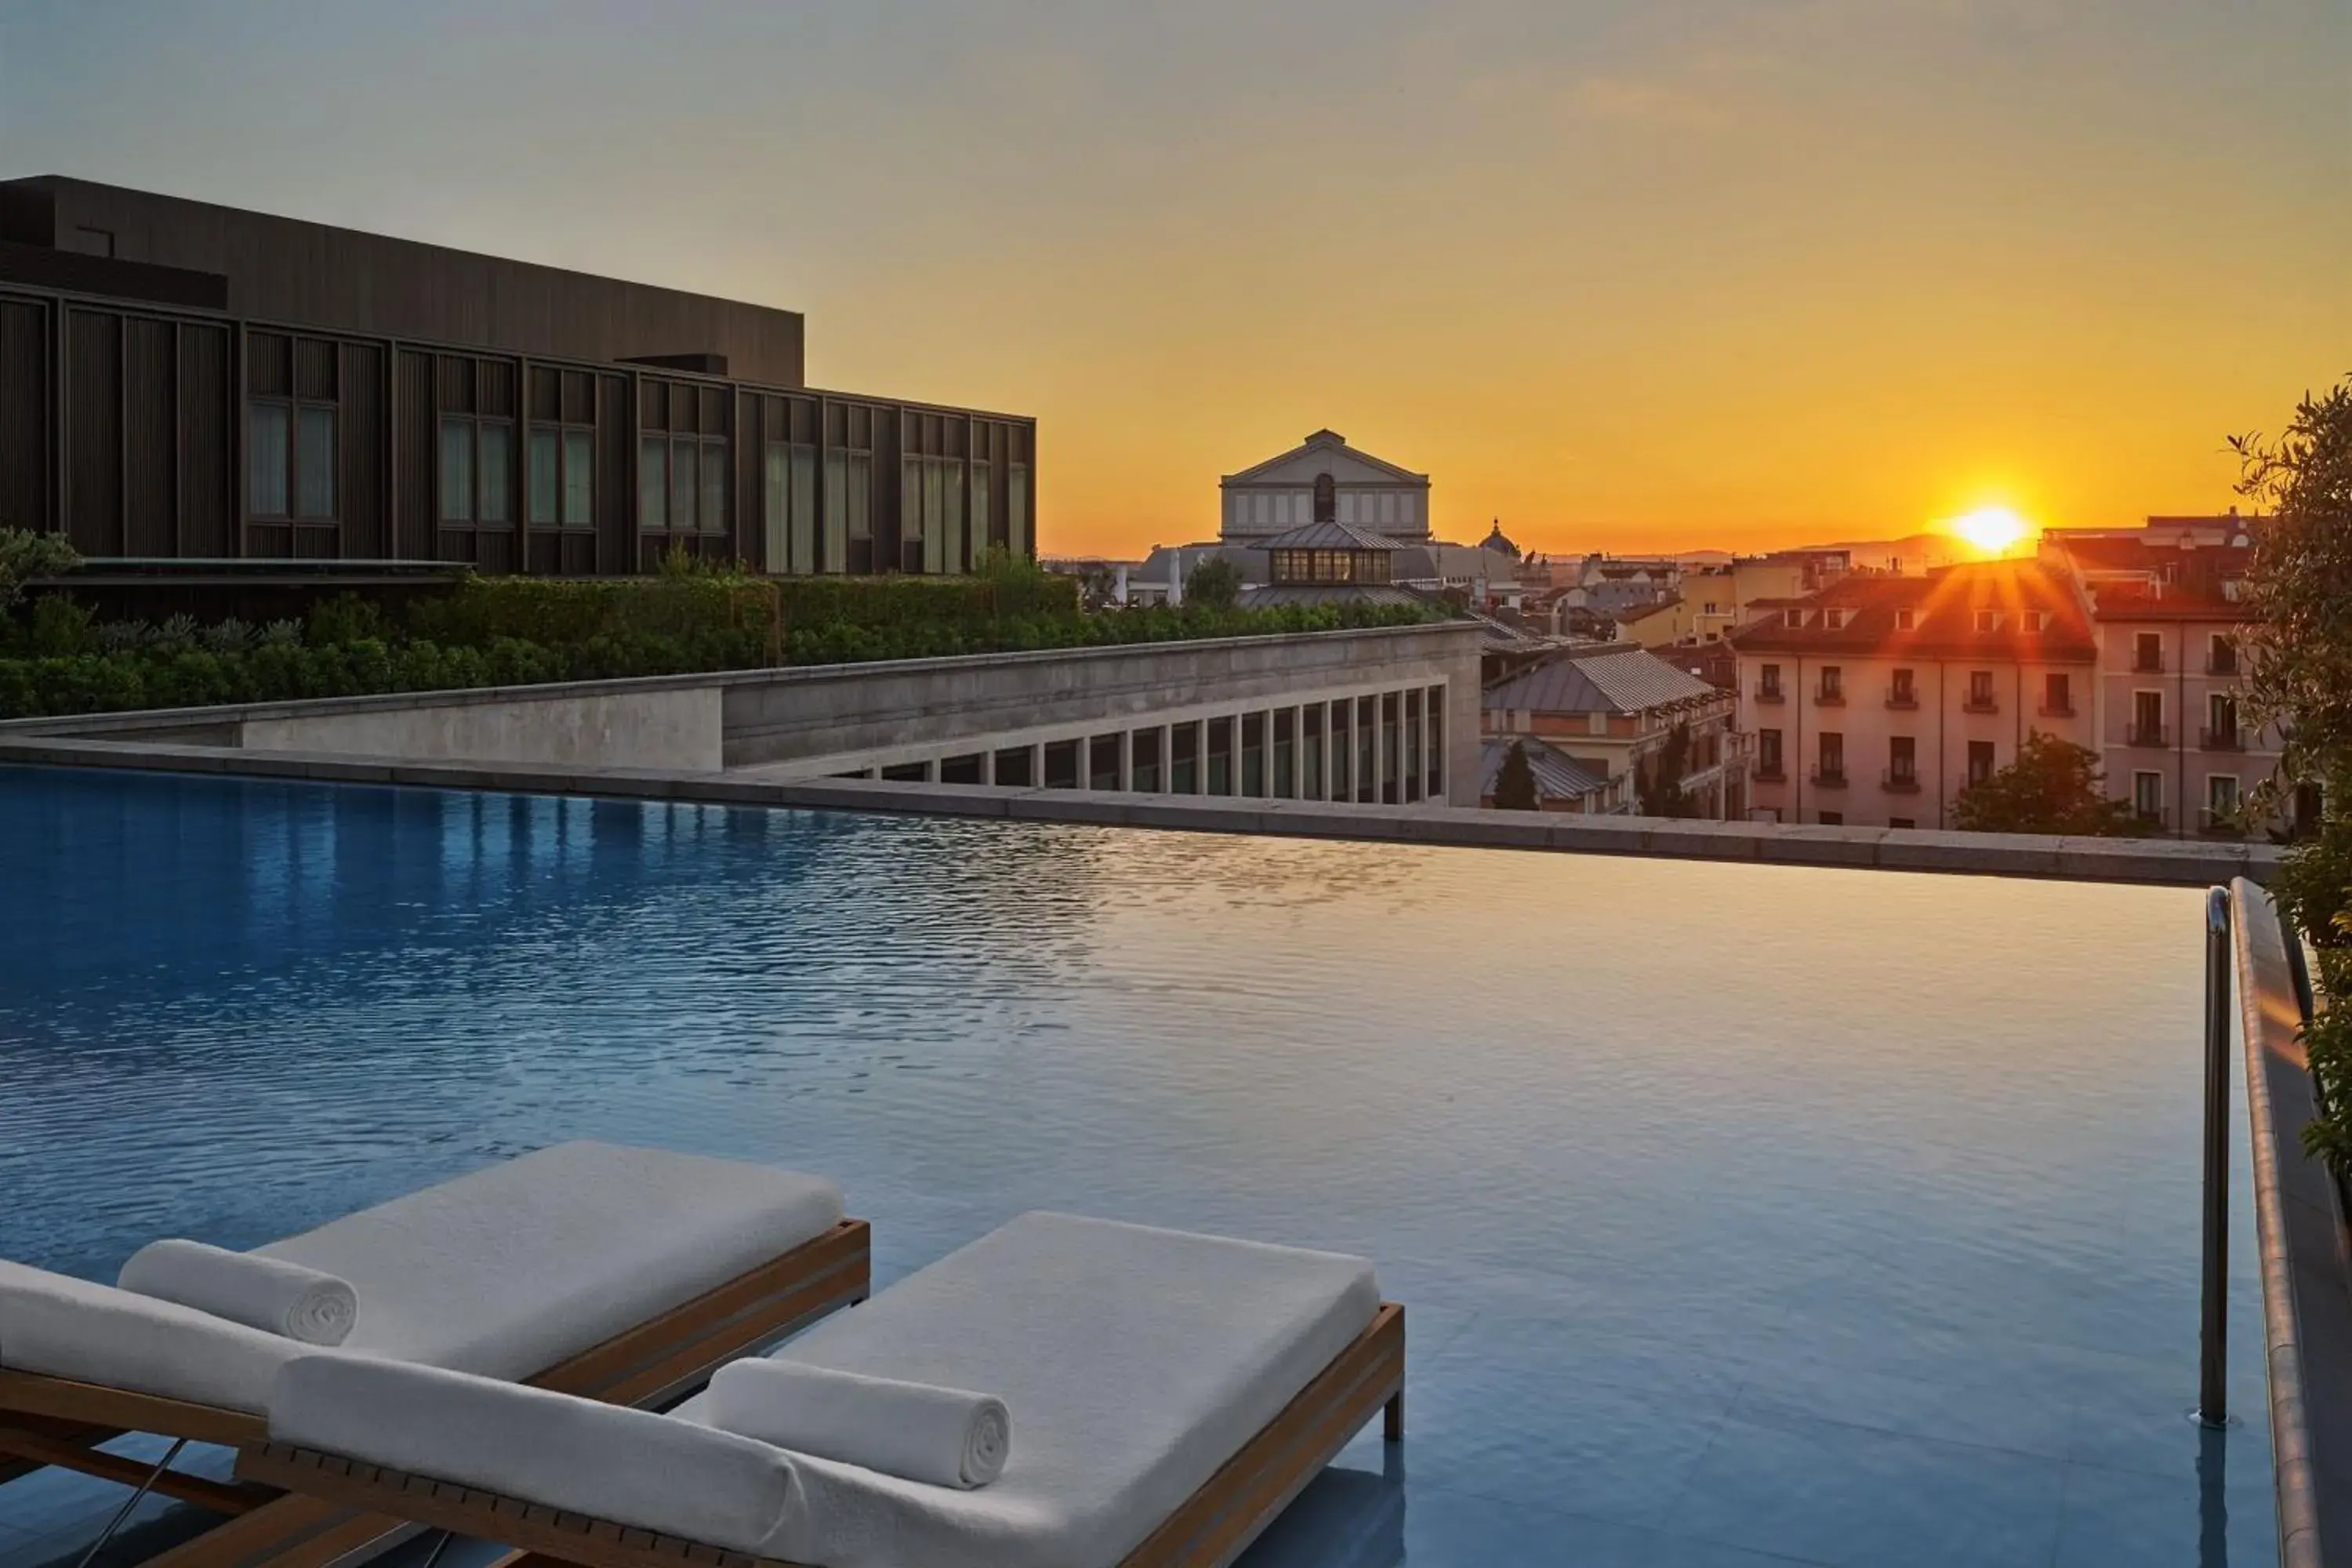 Swimming pool, Sunrise/Sunset in The Madrid EDITION